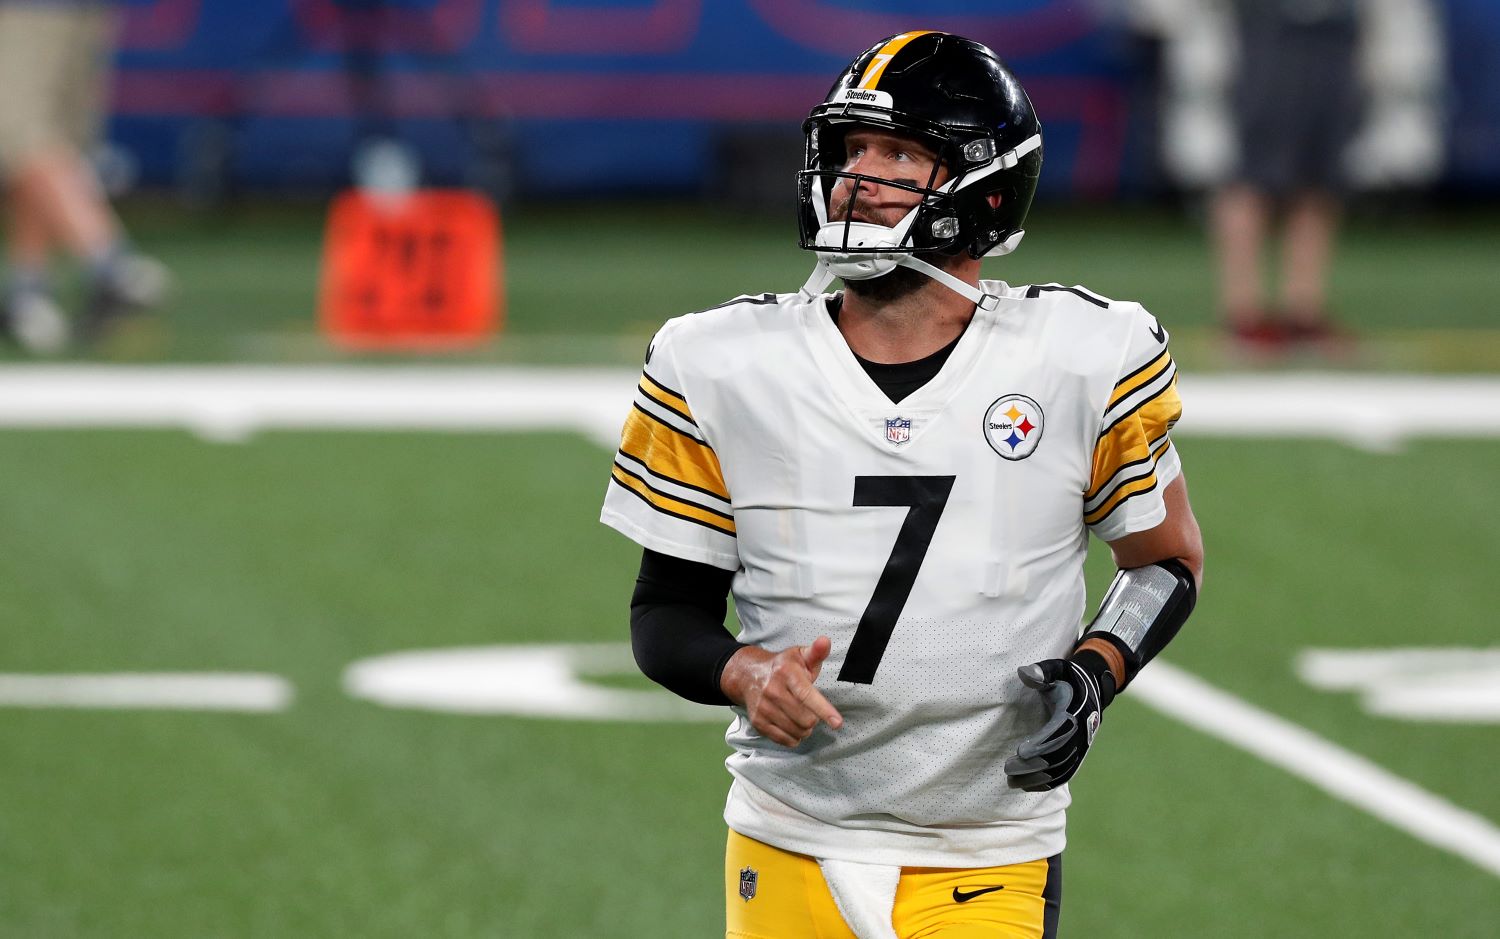 The Pittsburgh Steelers have given Ben Roethlisberger a clear ultimatum, but does that mean the aging QB will remain in the AFC North?